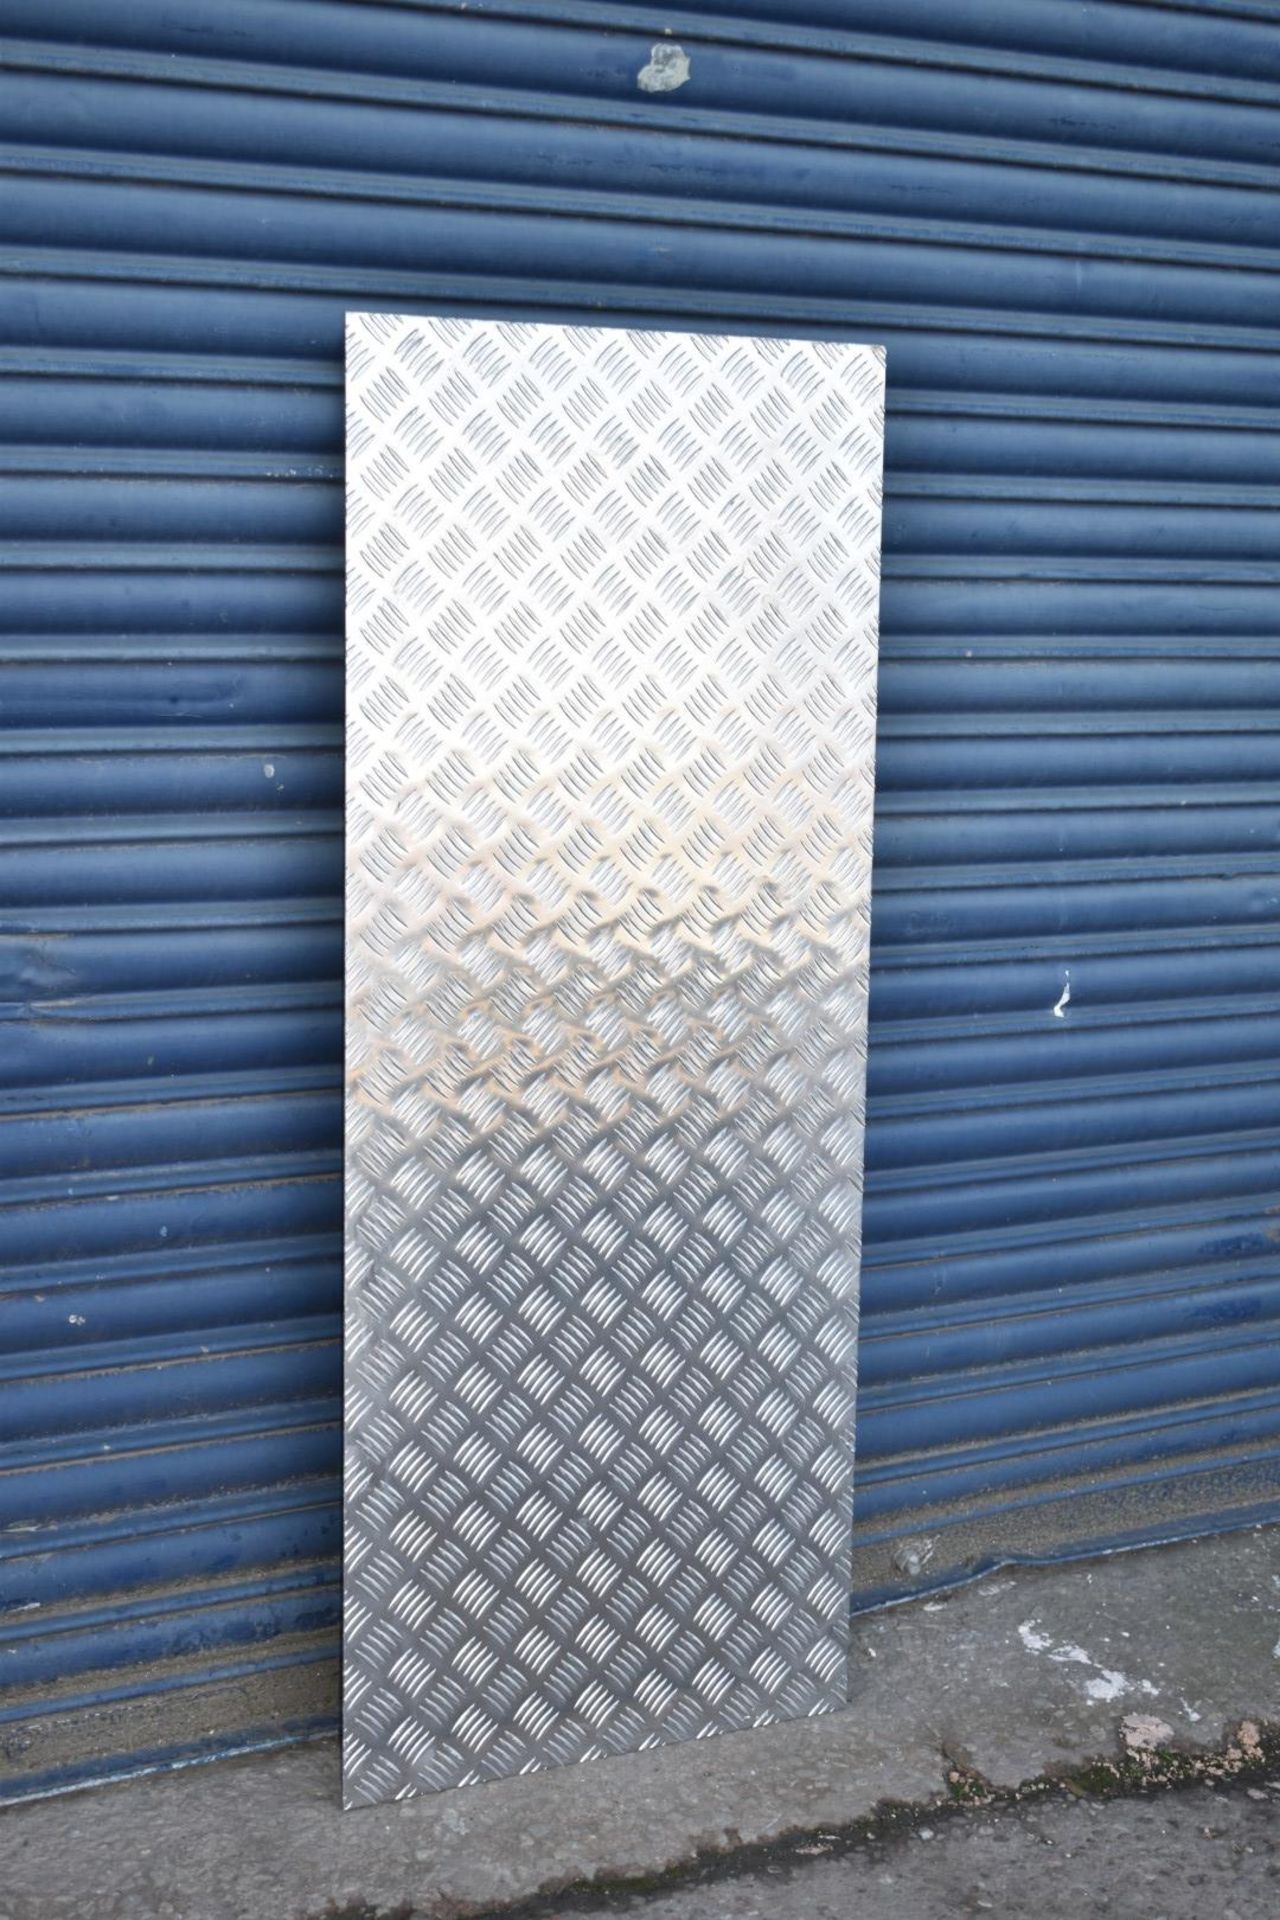 1 x Aluminium Tread Checker Plate - Size 125 x 50.5 x 0.3 cms - None Slip Floor Plate Suitable For - Image 3 of 5